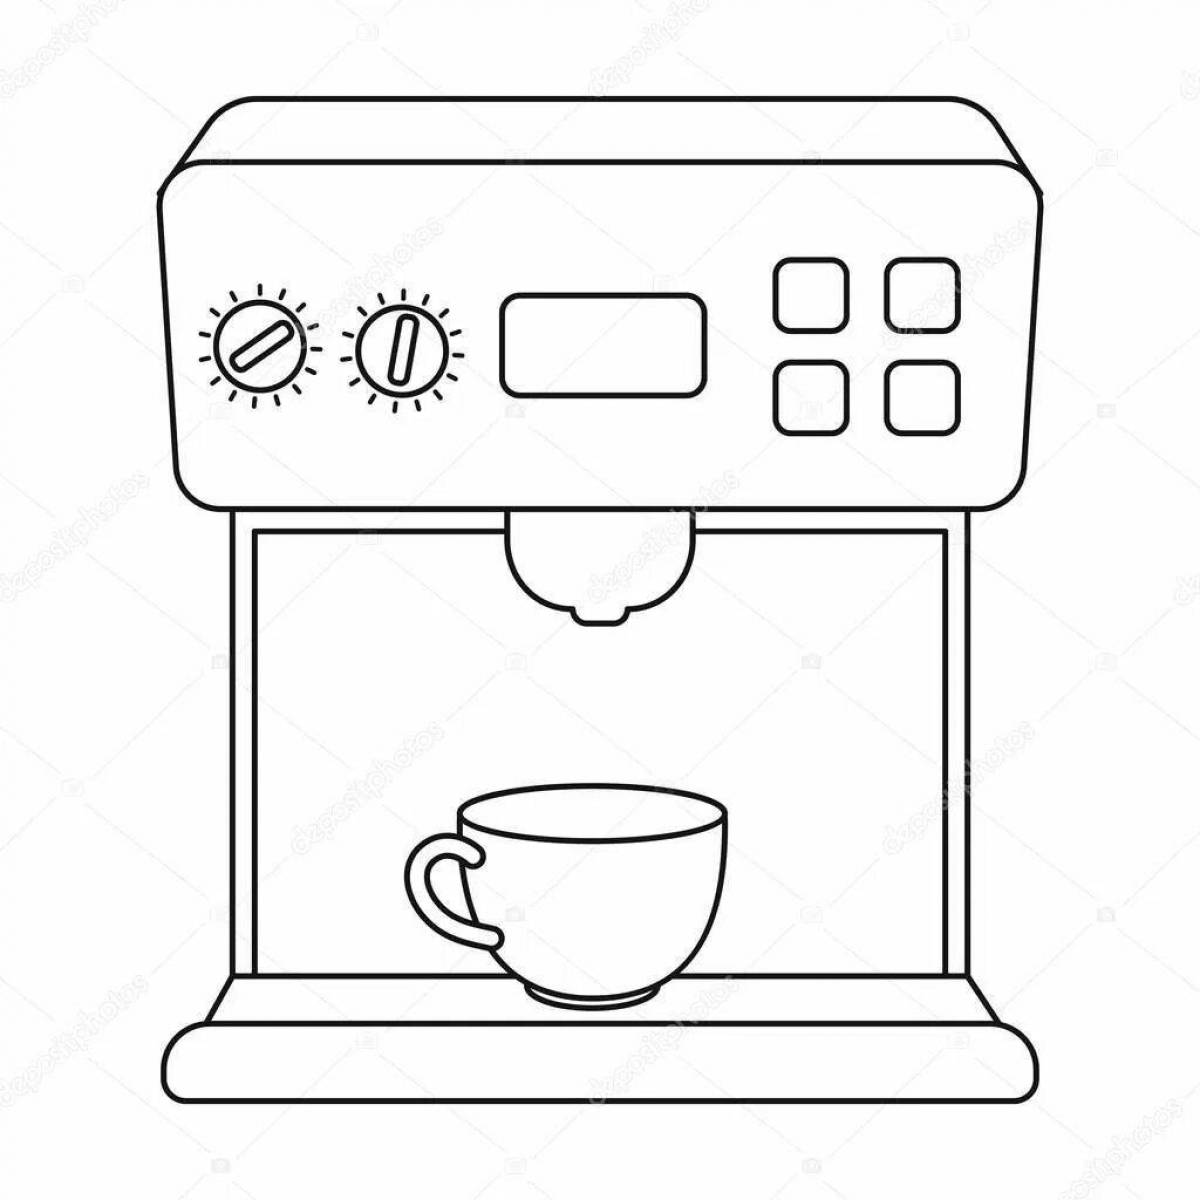 Coffee machine coloring page with rich colors